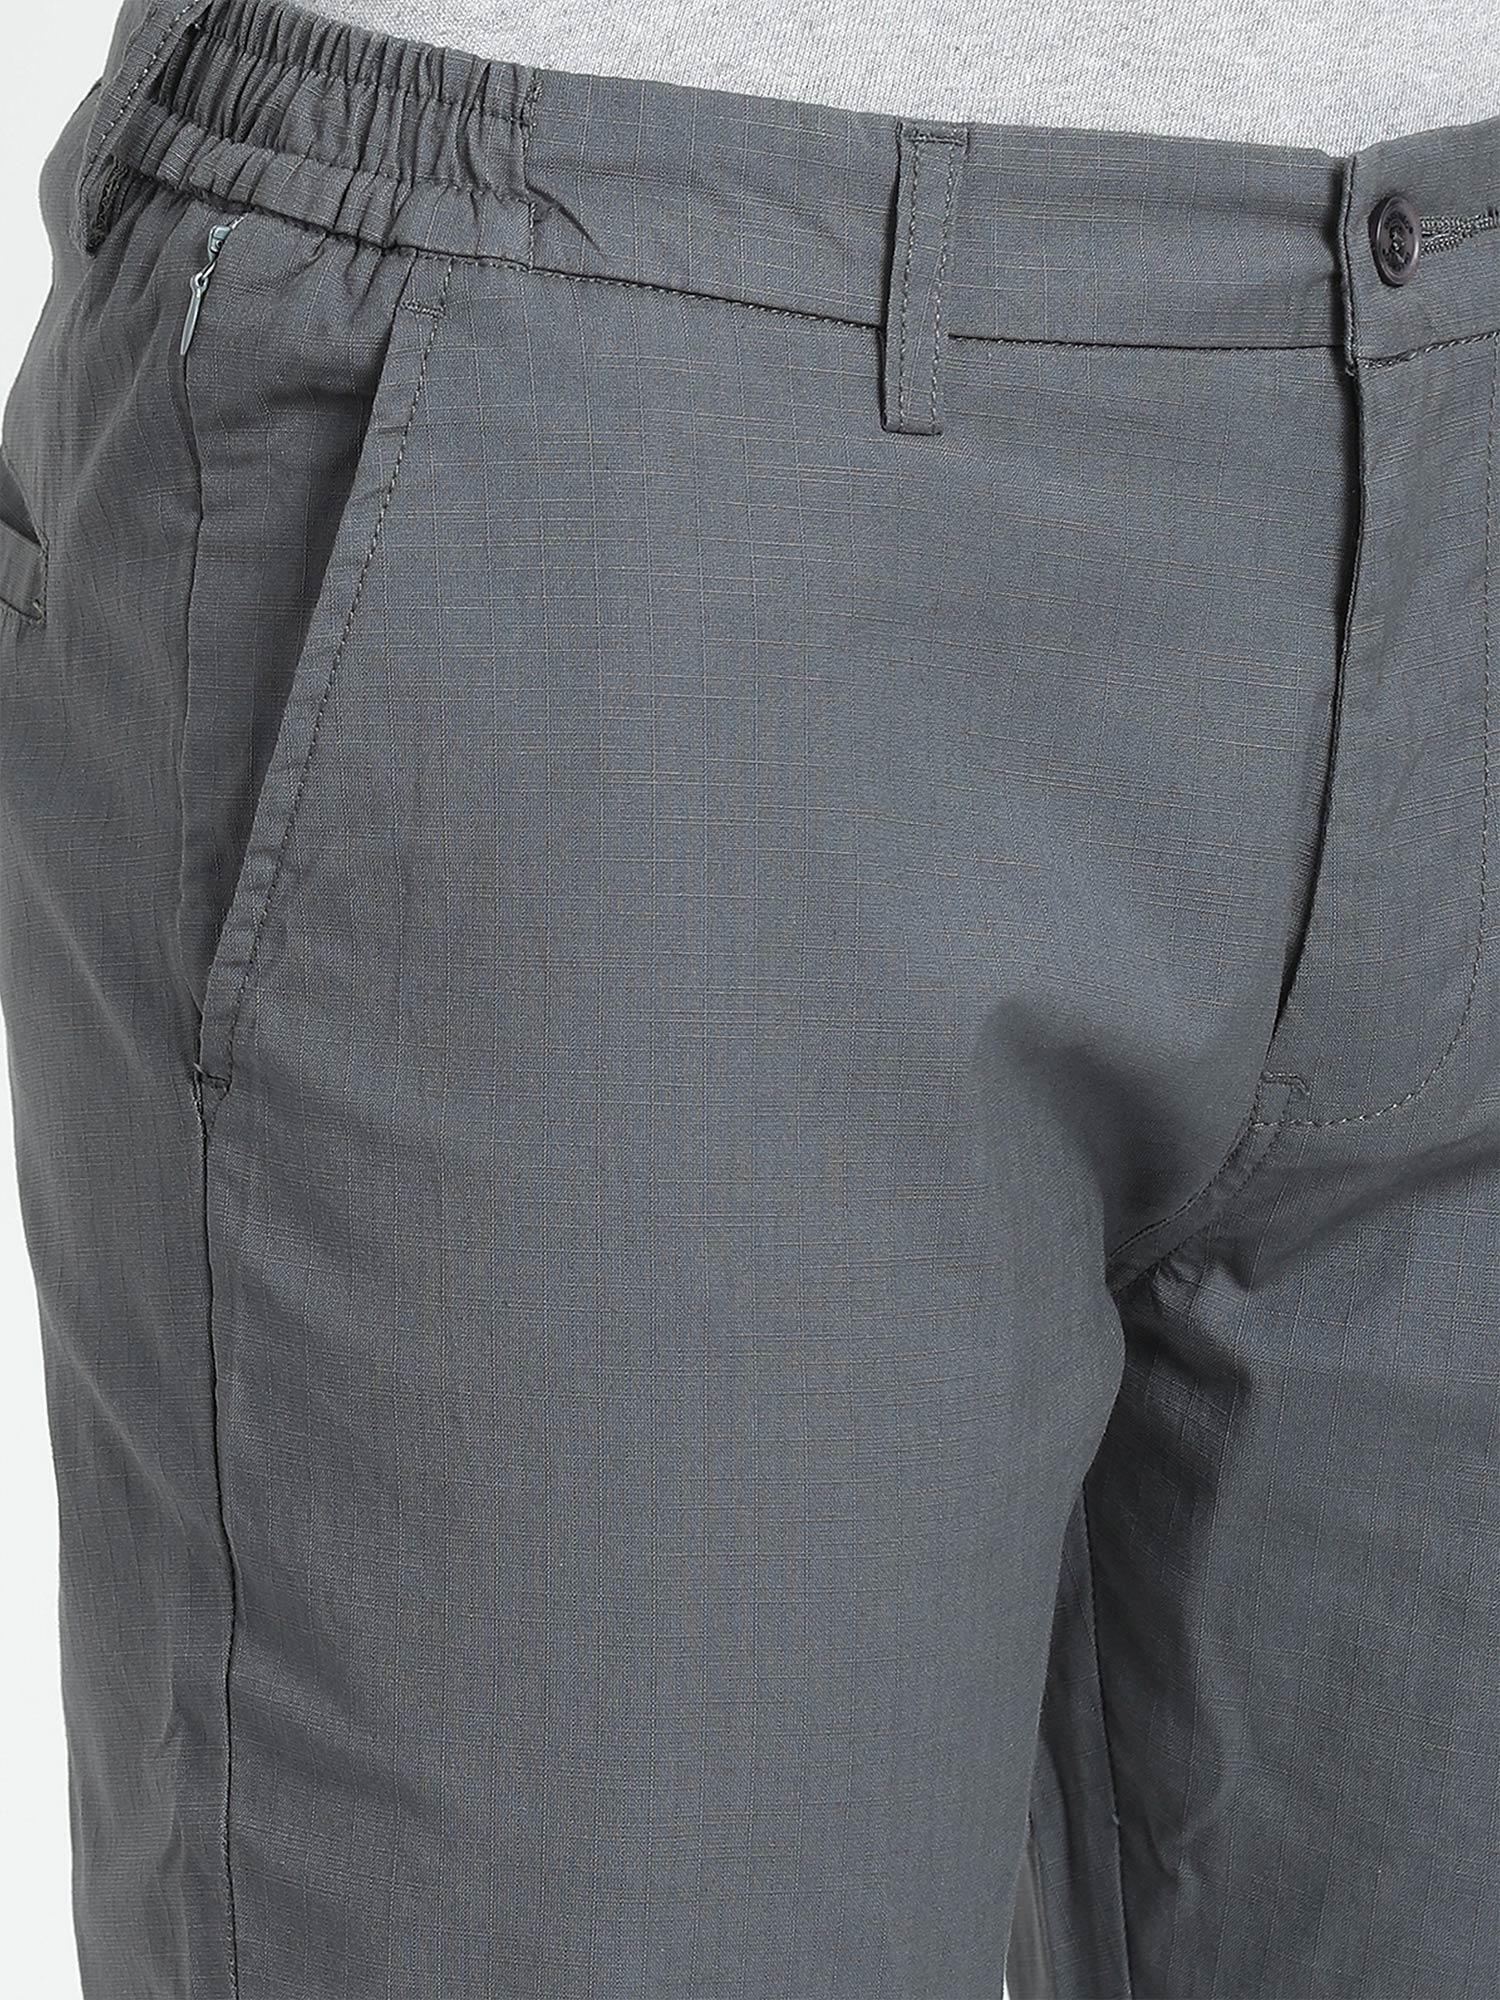 Buy Grey Trousers & Pants for Men by tQs Online | Ajio.com